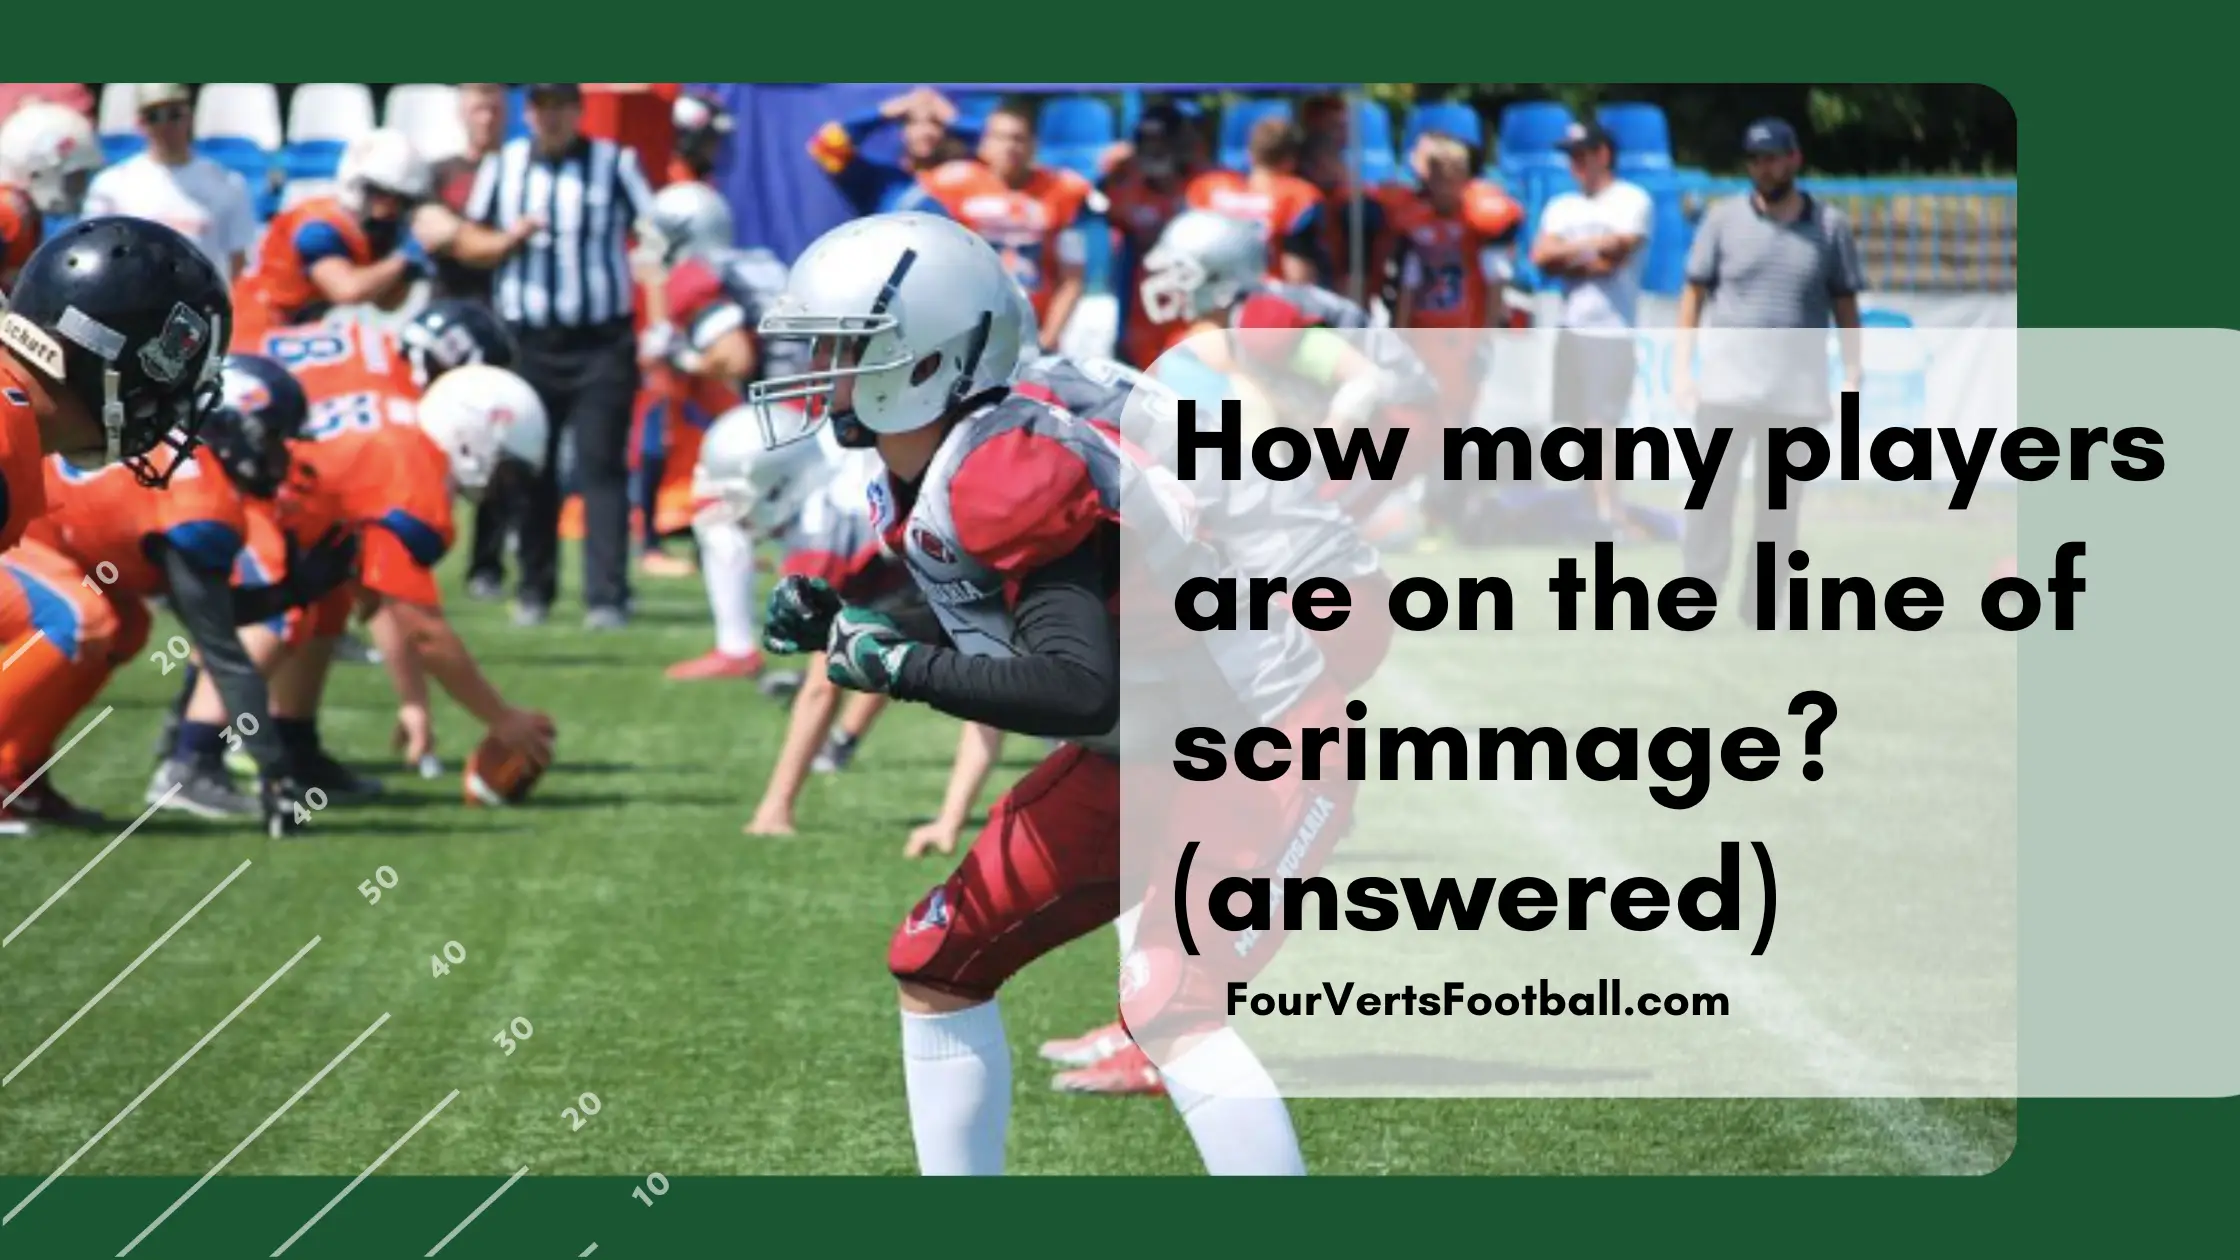 How many players are on the line of scrimmage